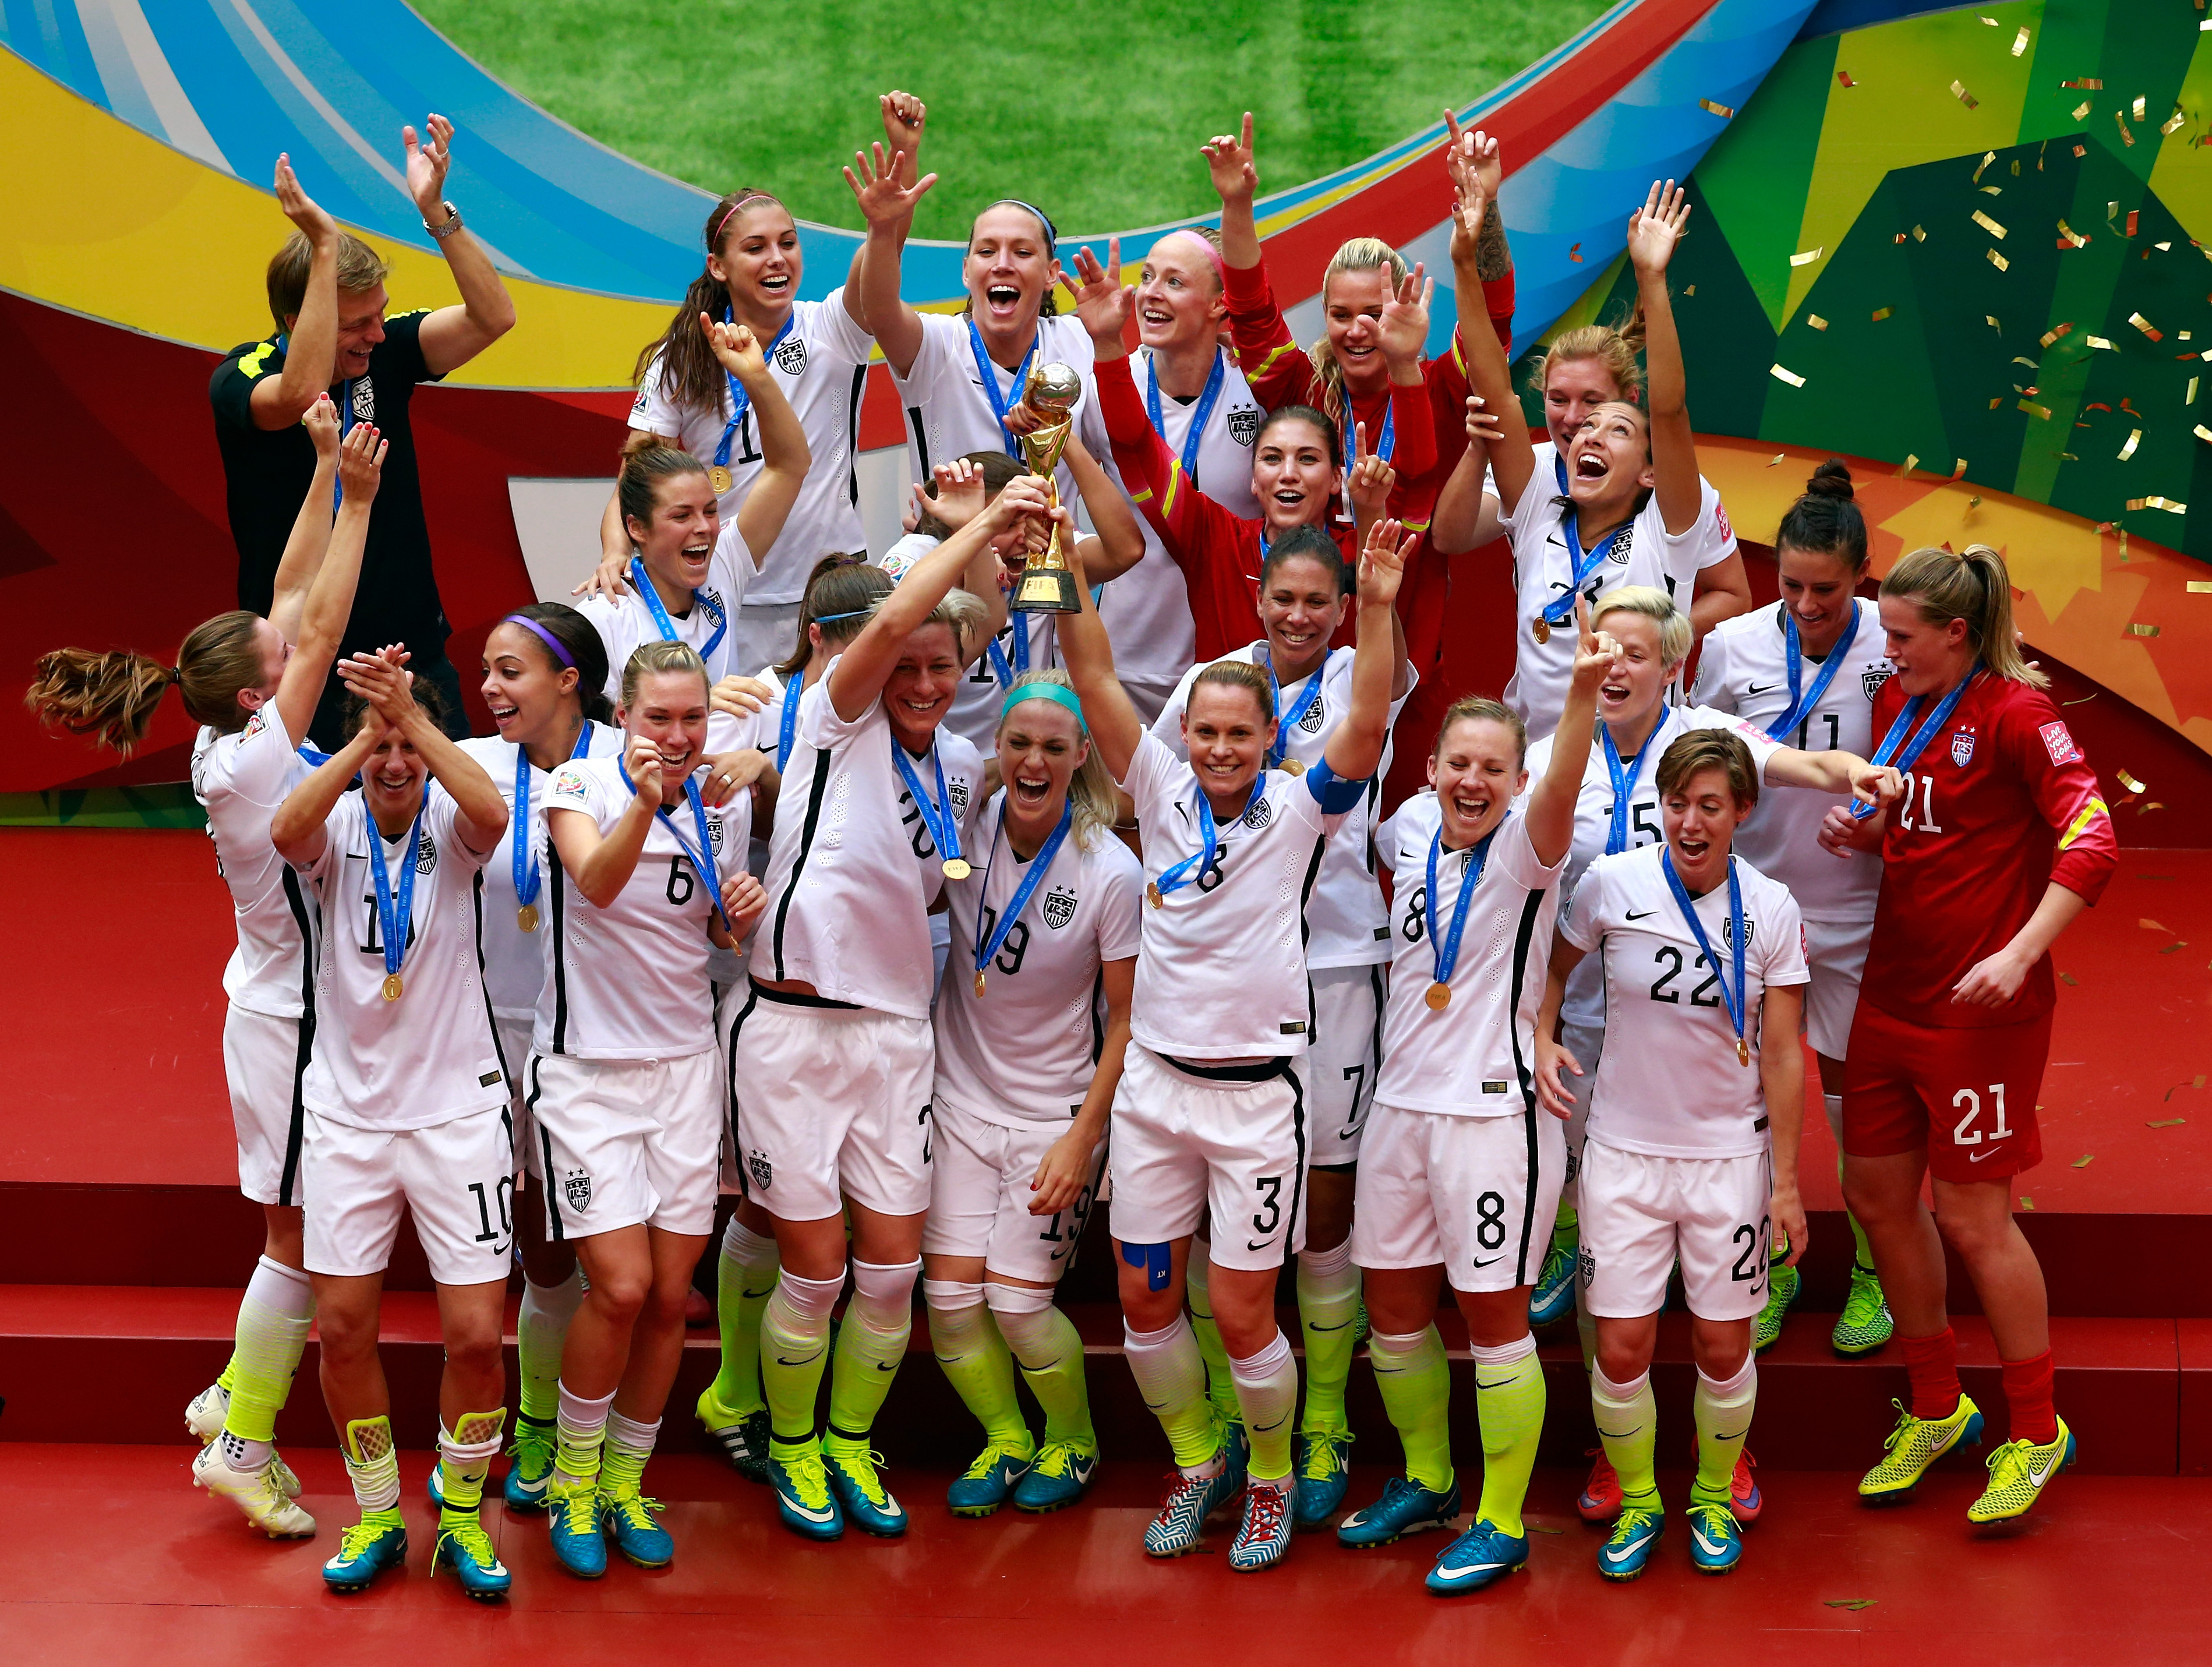 Well Played Usa Women S Soccer Team World Cup 2015 Champions Go Fug Yourself